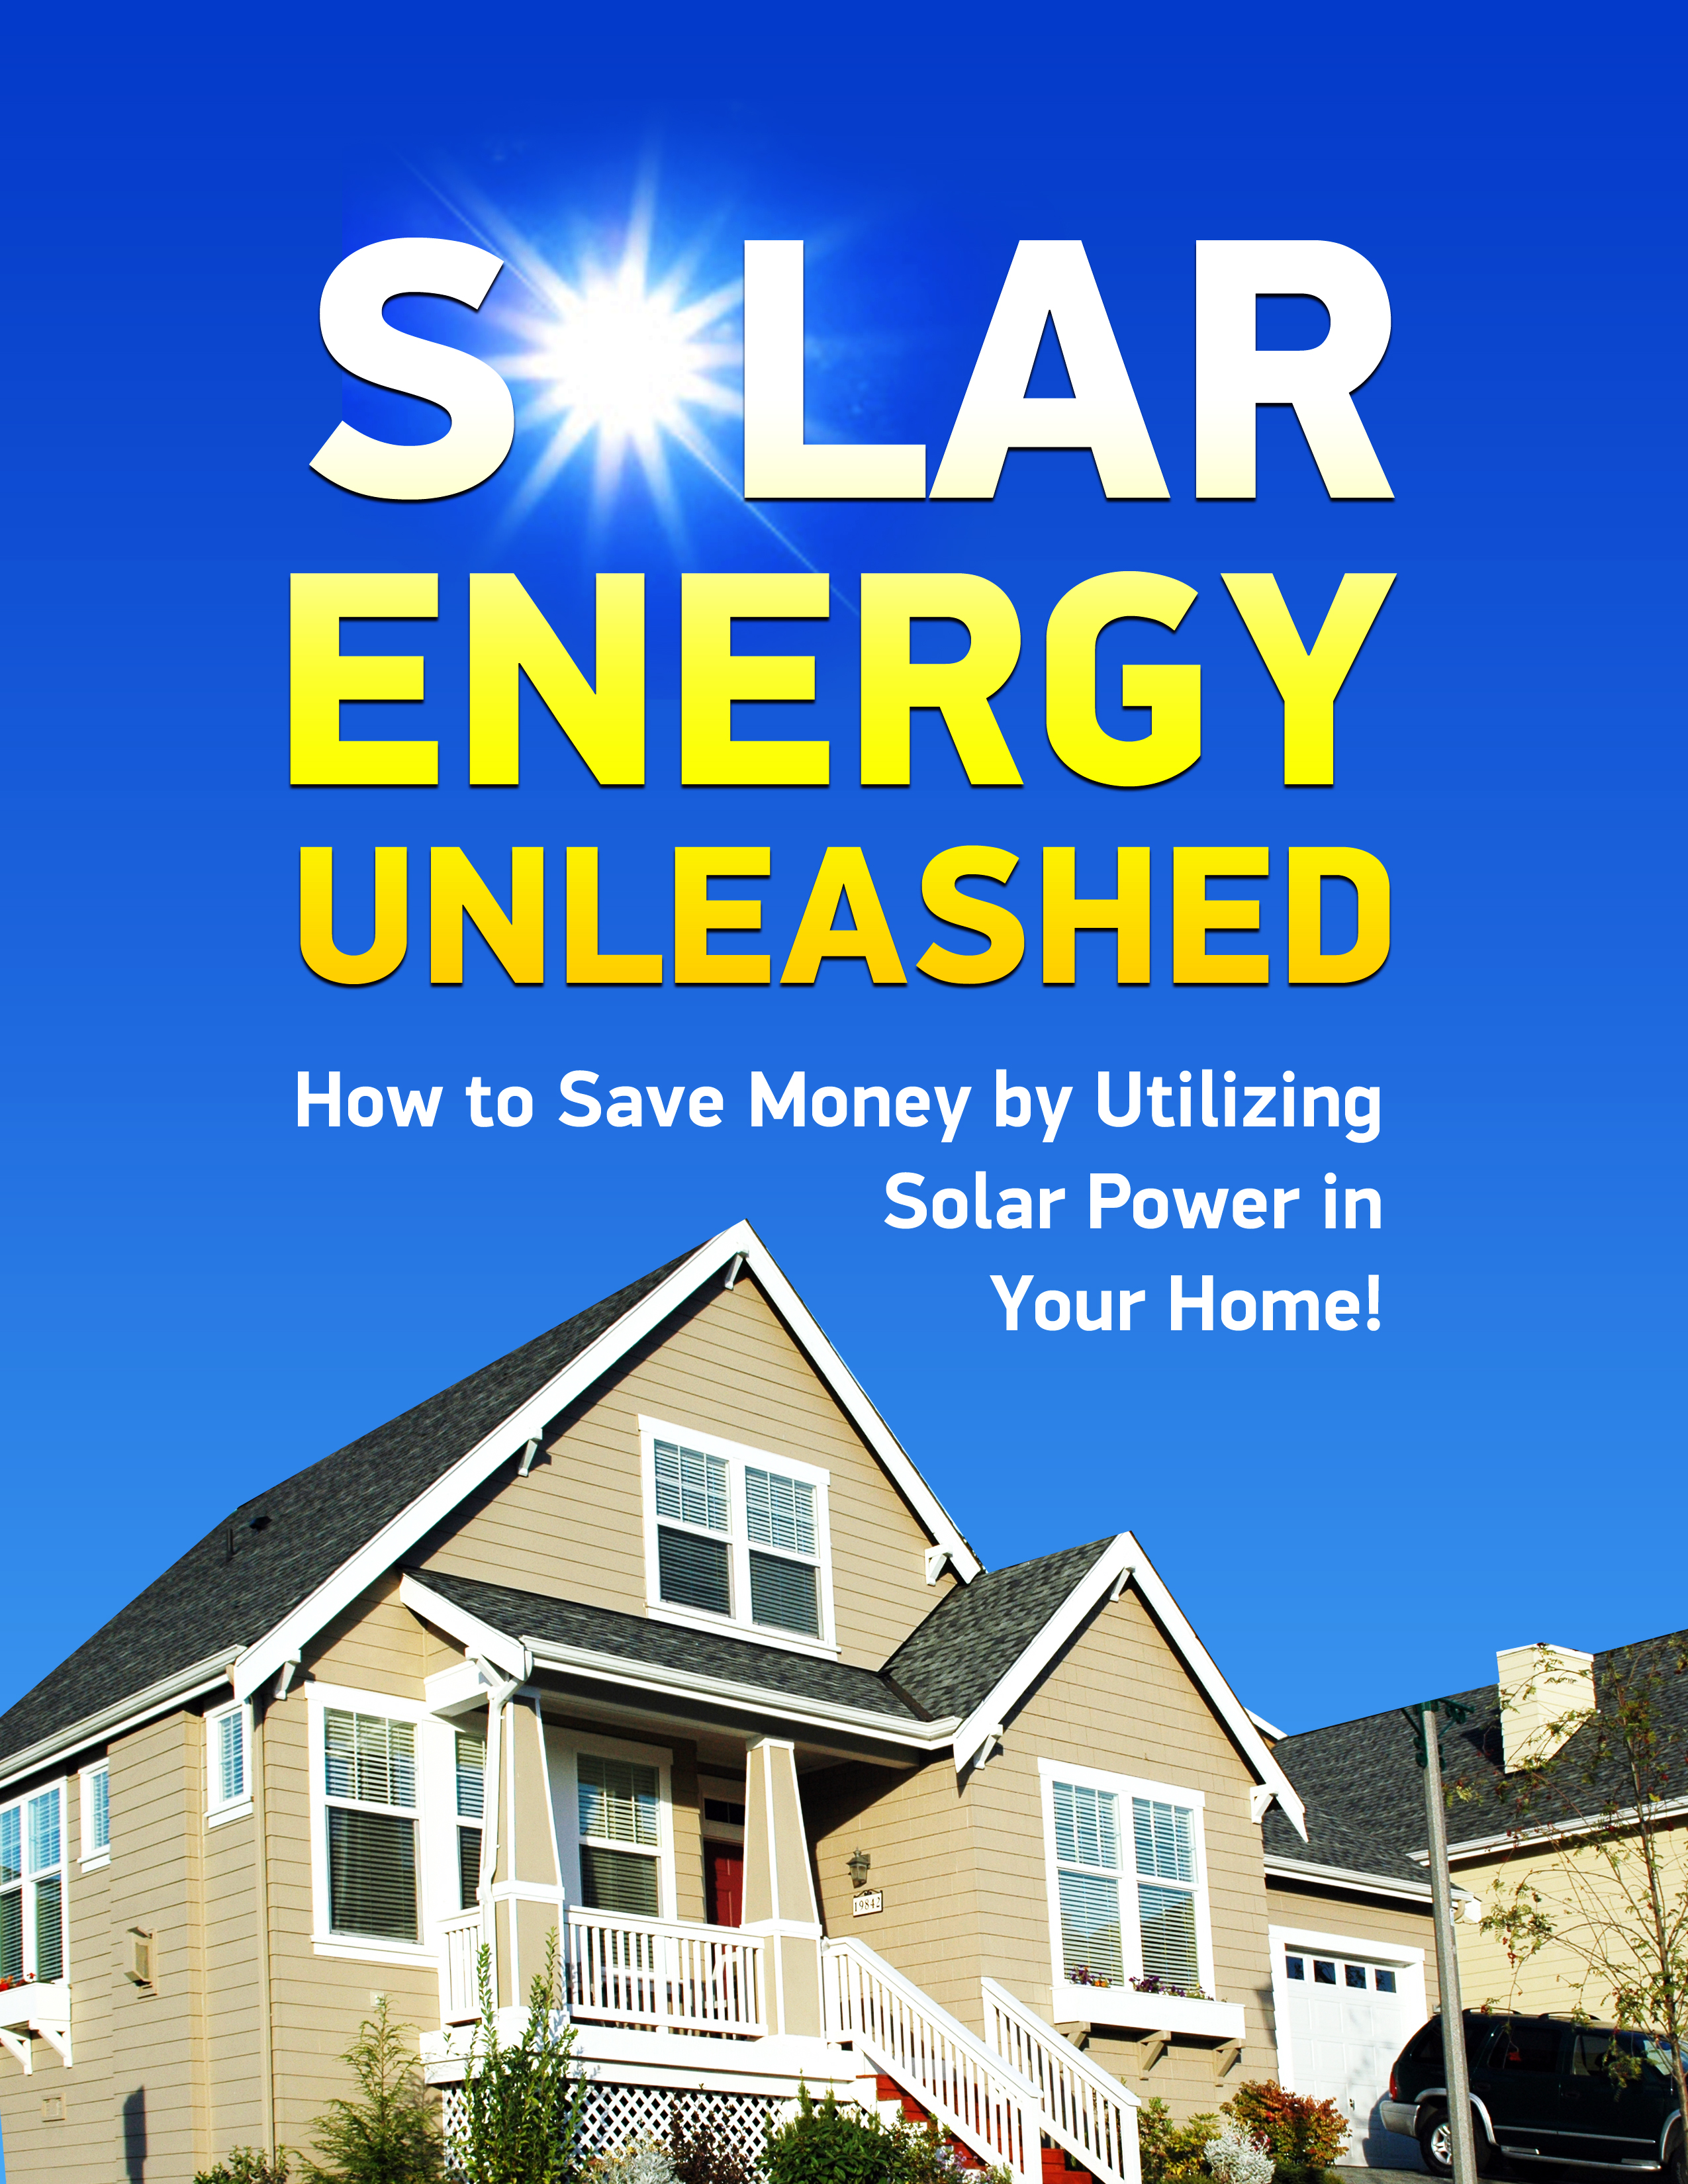 How_to_save_money_by_utilizing_solar_power_in_your_home.jpg